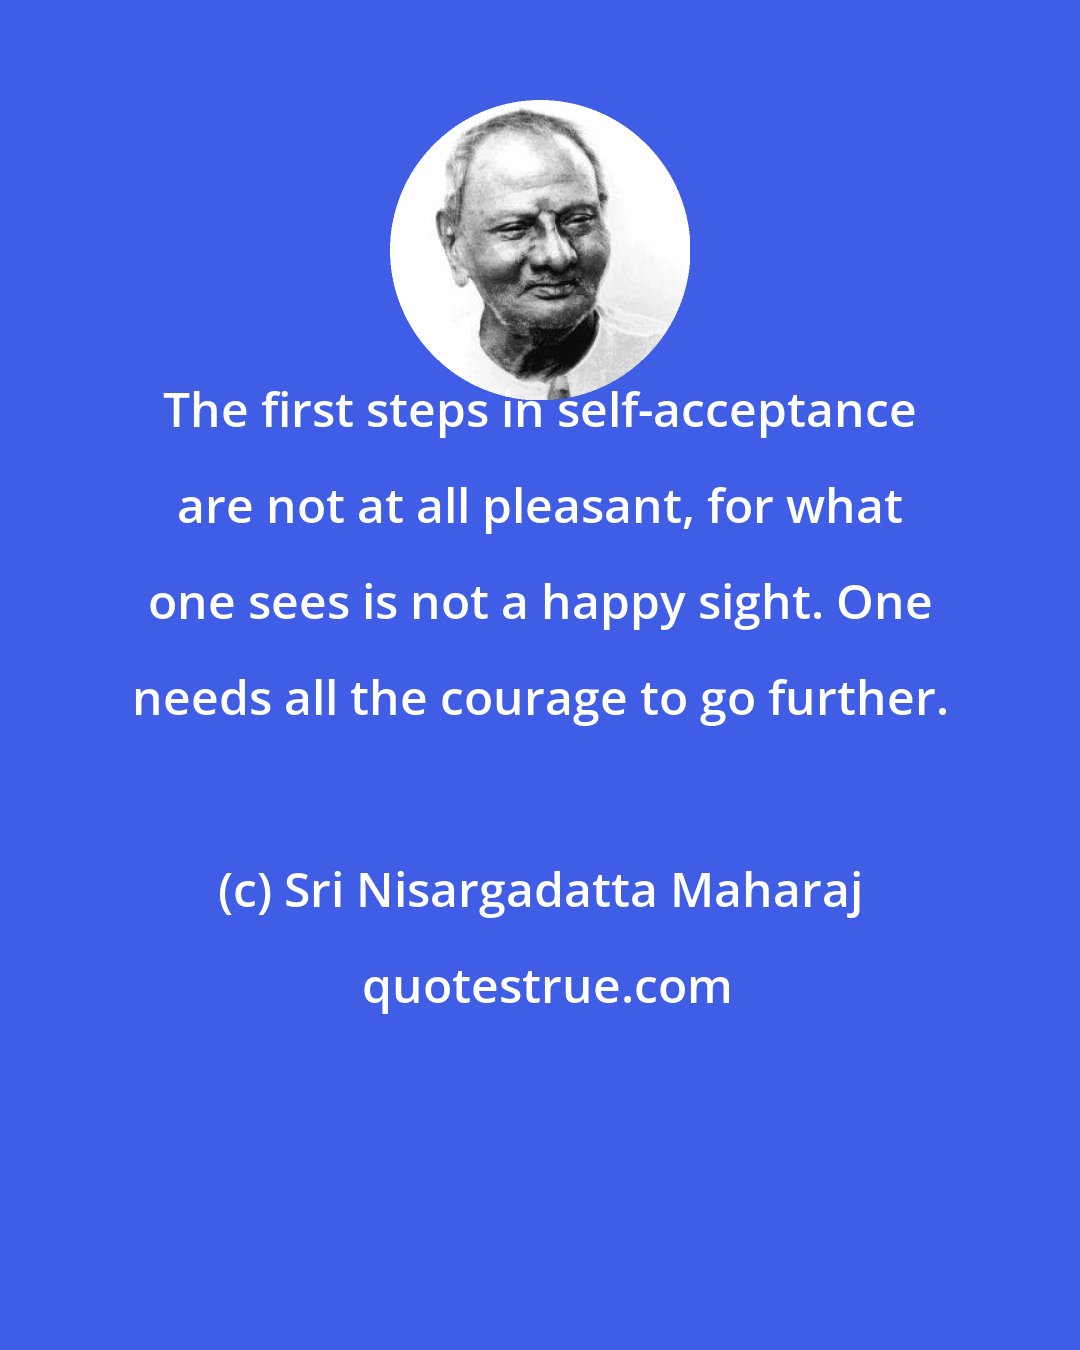 Sri Nisargadatta Maharaj: The first steps in self-acceptance are not at all pleasant, for what one sees is not a happy sight. One needs all the courage to go further.